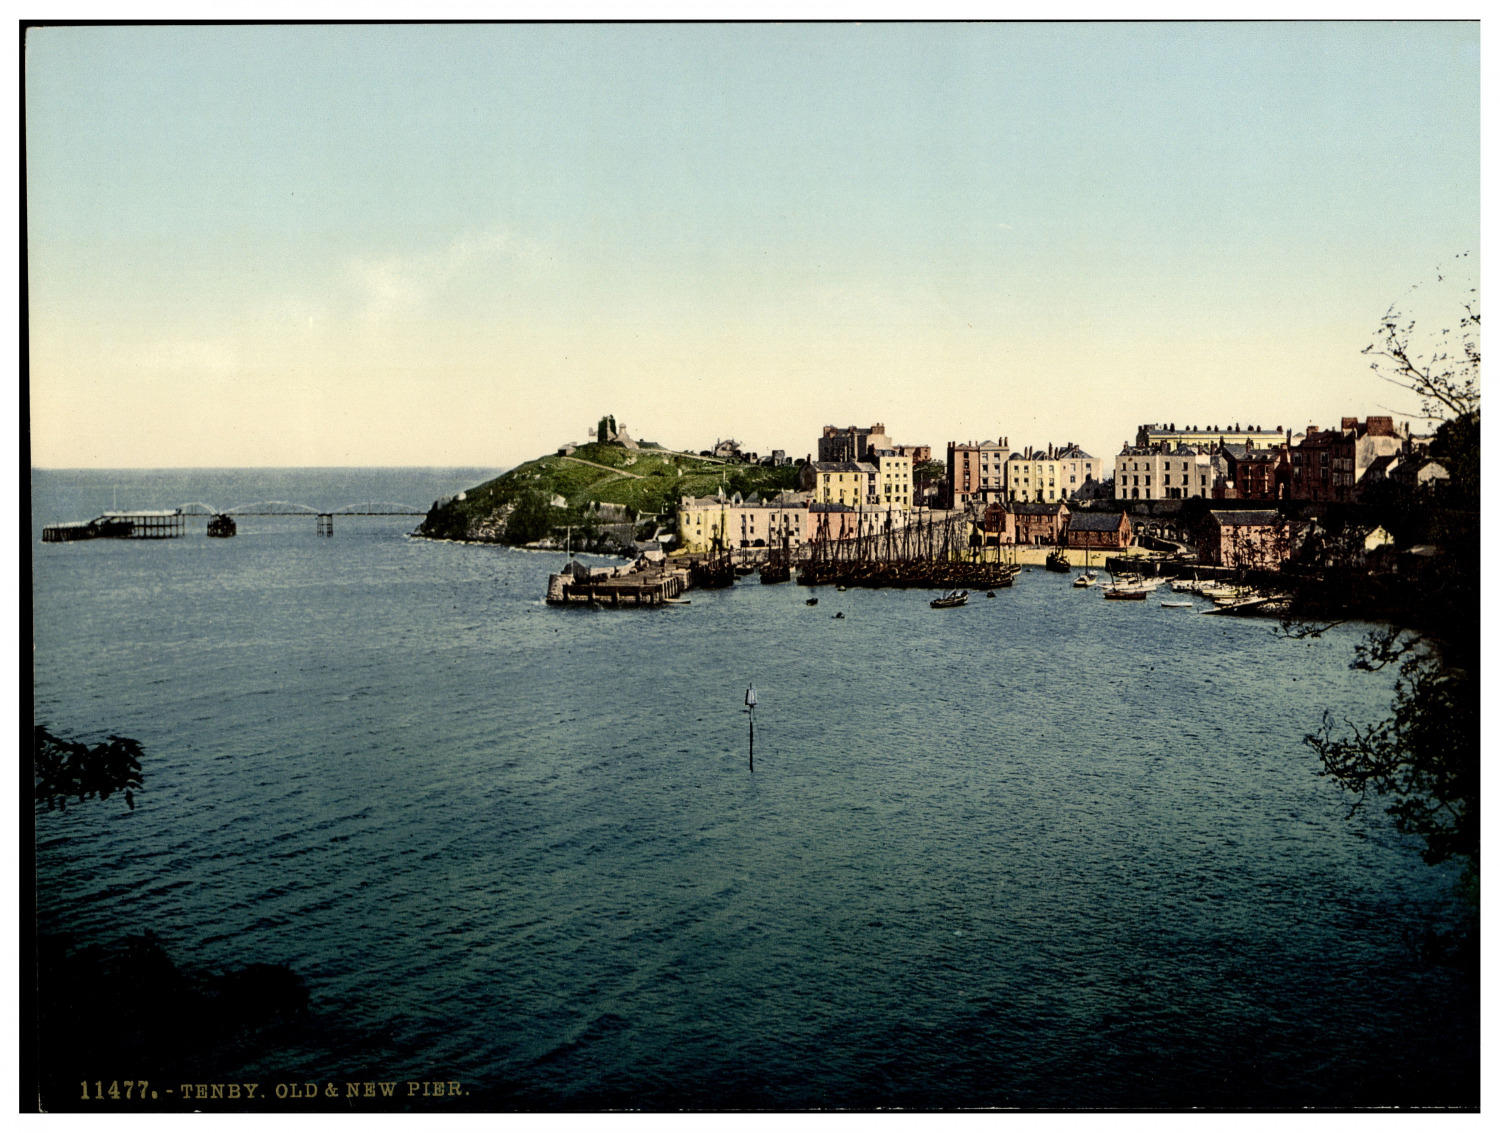 Wales. Tenby. Old and New Pier.  Vintage Photochrome by P.Z, Photochrome 